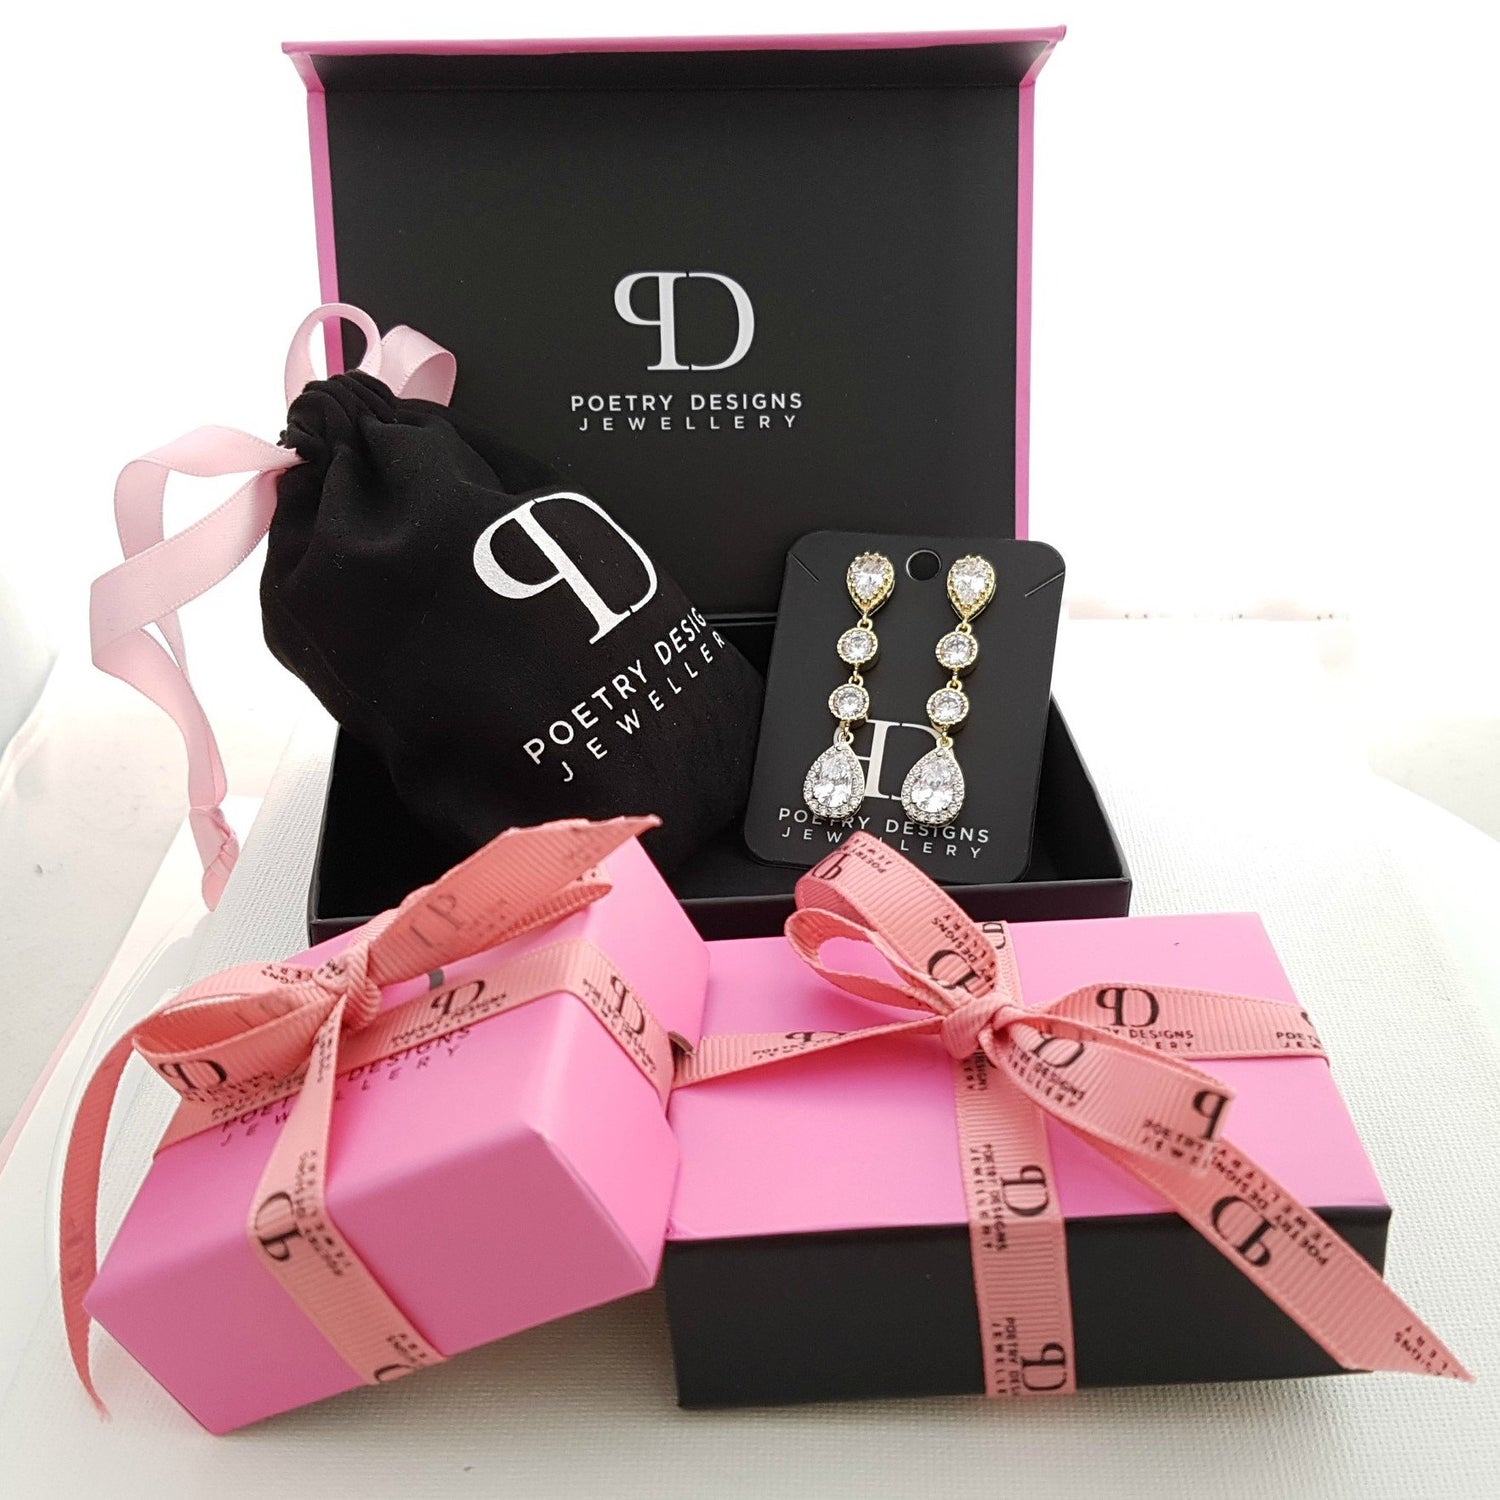 Packaging Wedding and Gift Ready- Poetry Designs